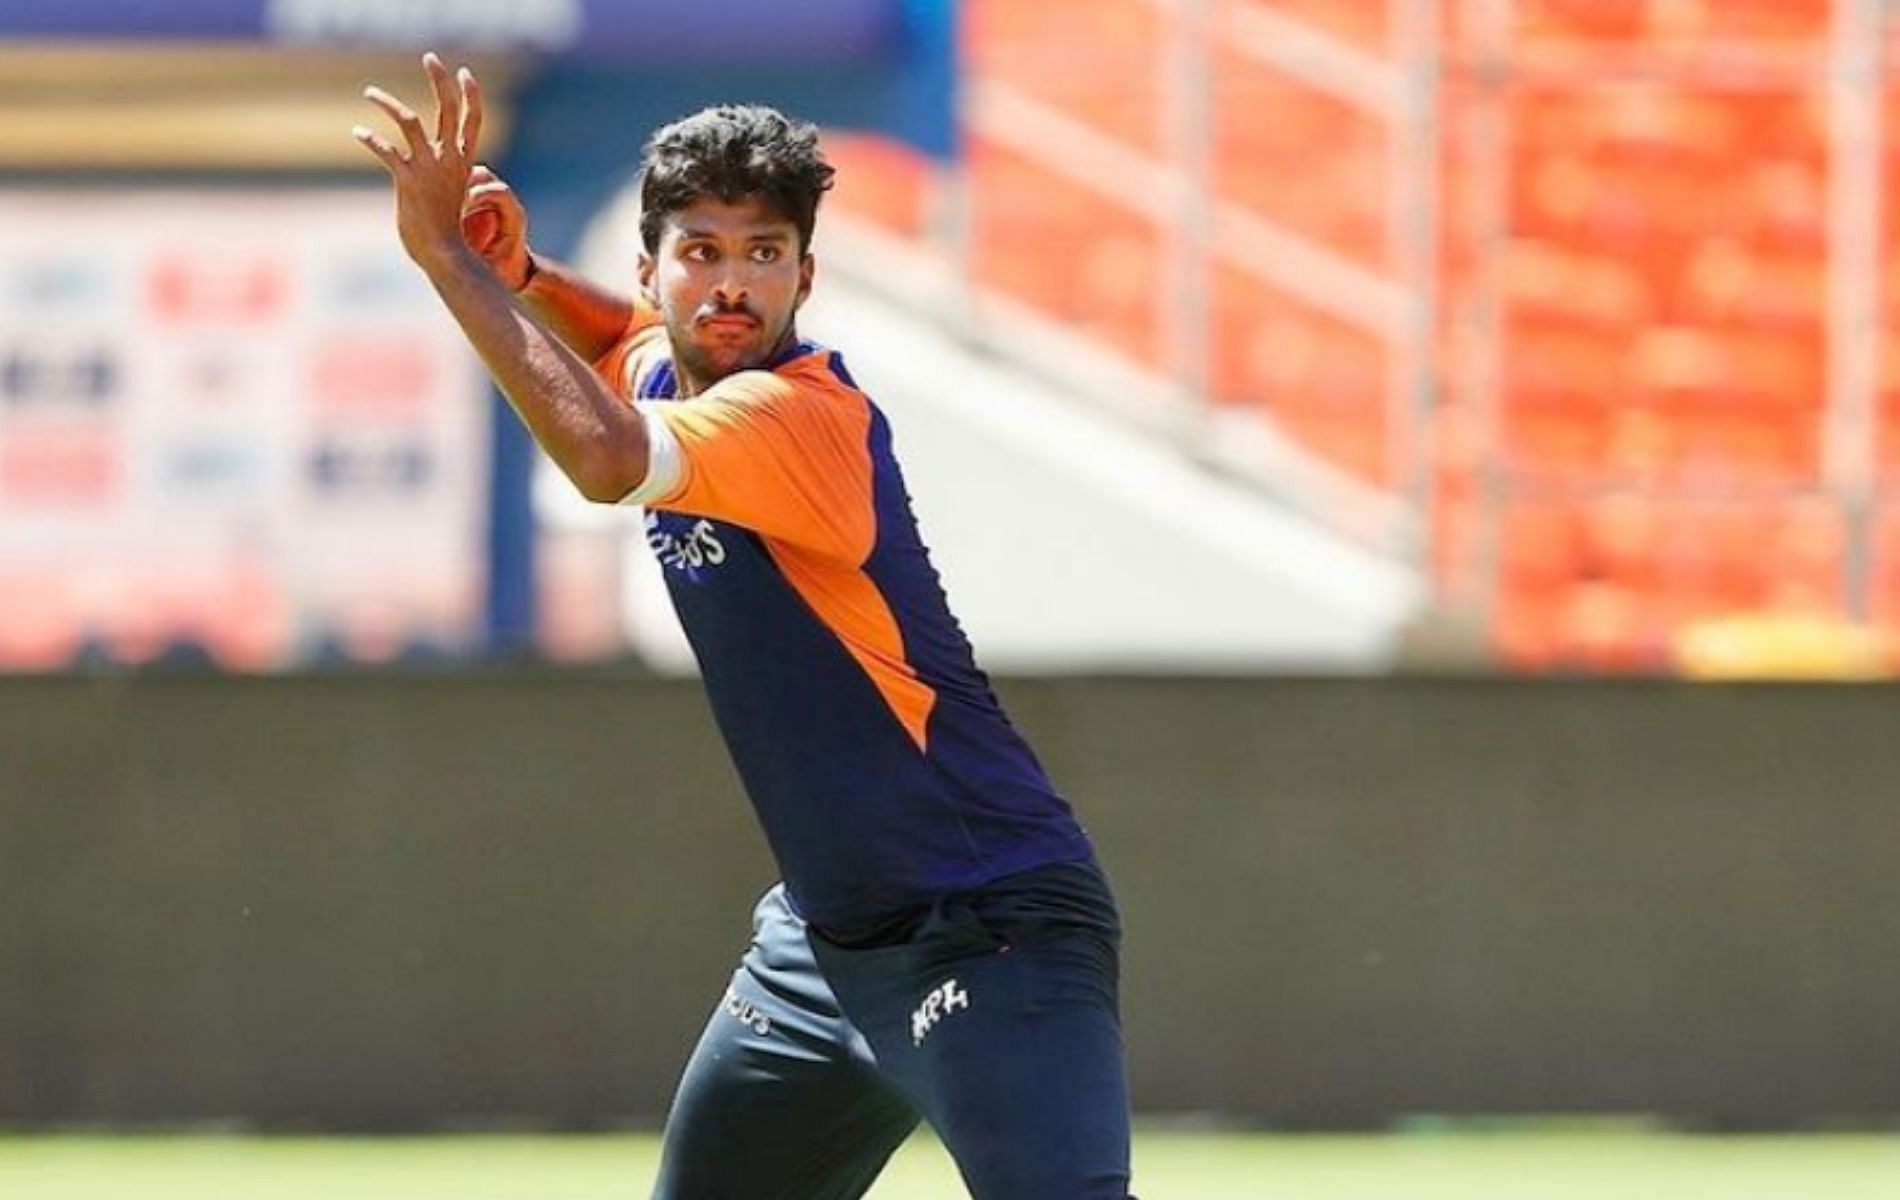 Washington Sundar is set to miss out on the three-match ODI series in South Africa.